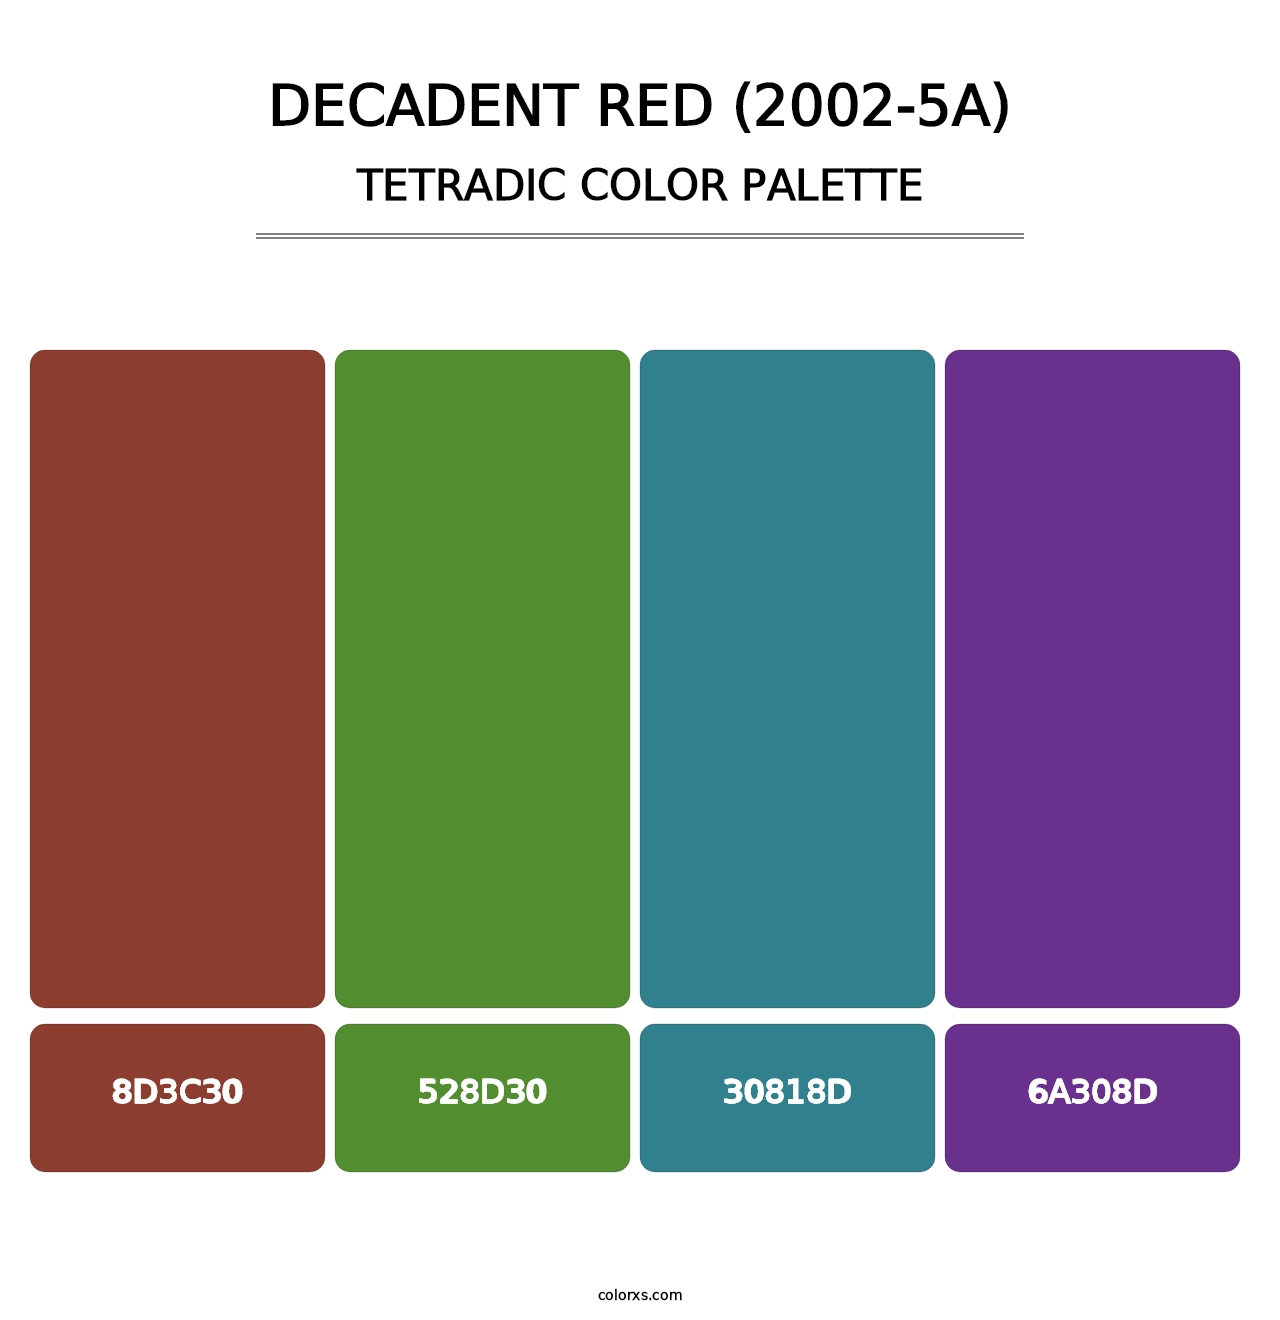 Decadent Red (2002-5A) - Tetradic Color Palette